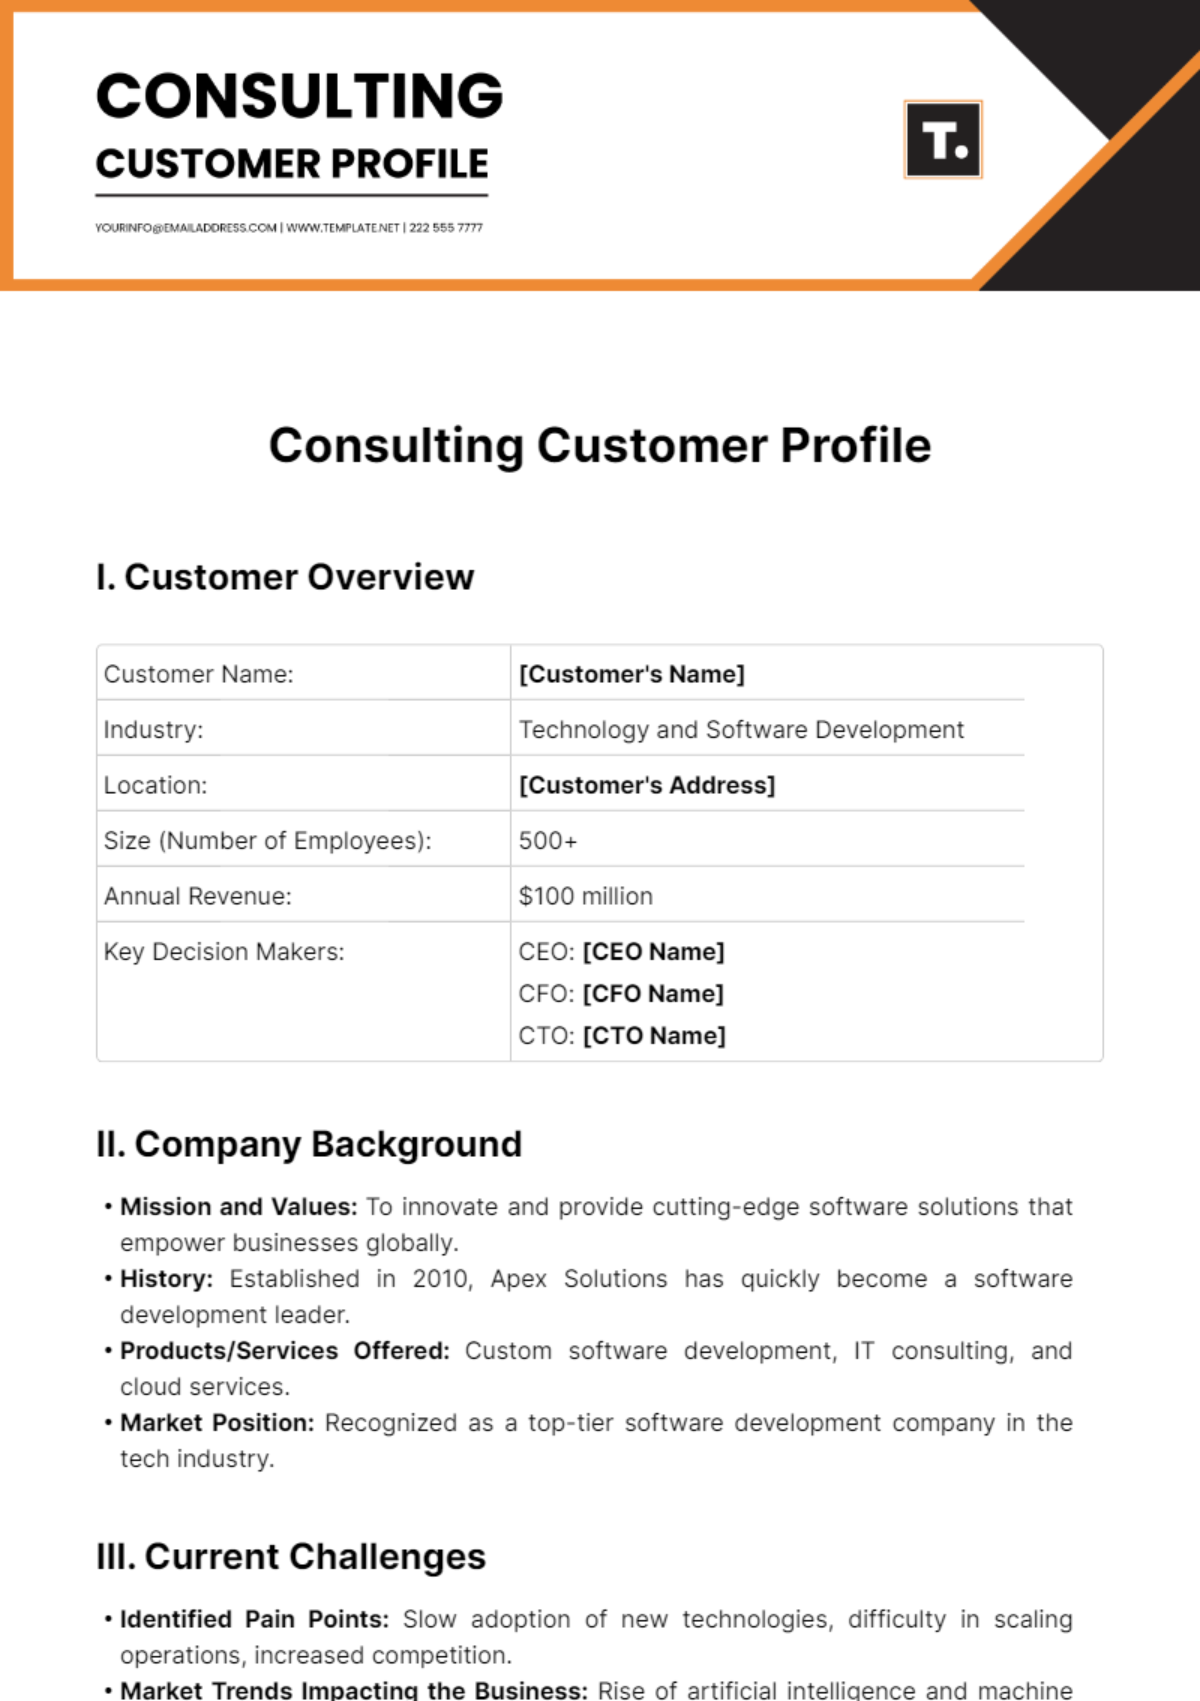 Consulting Customer Profile Template